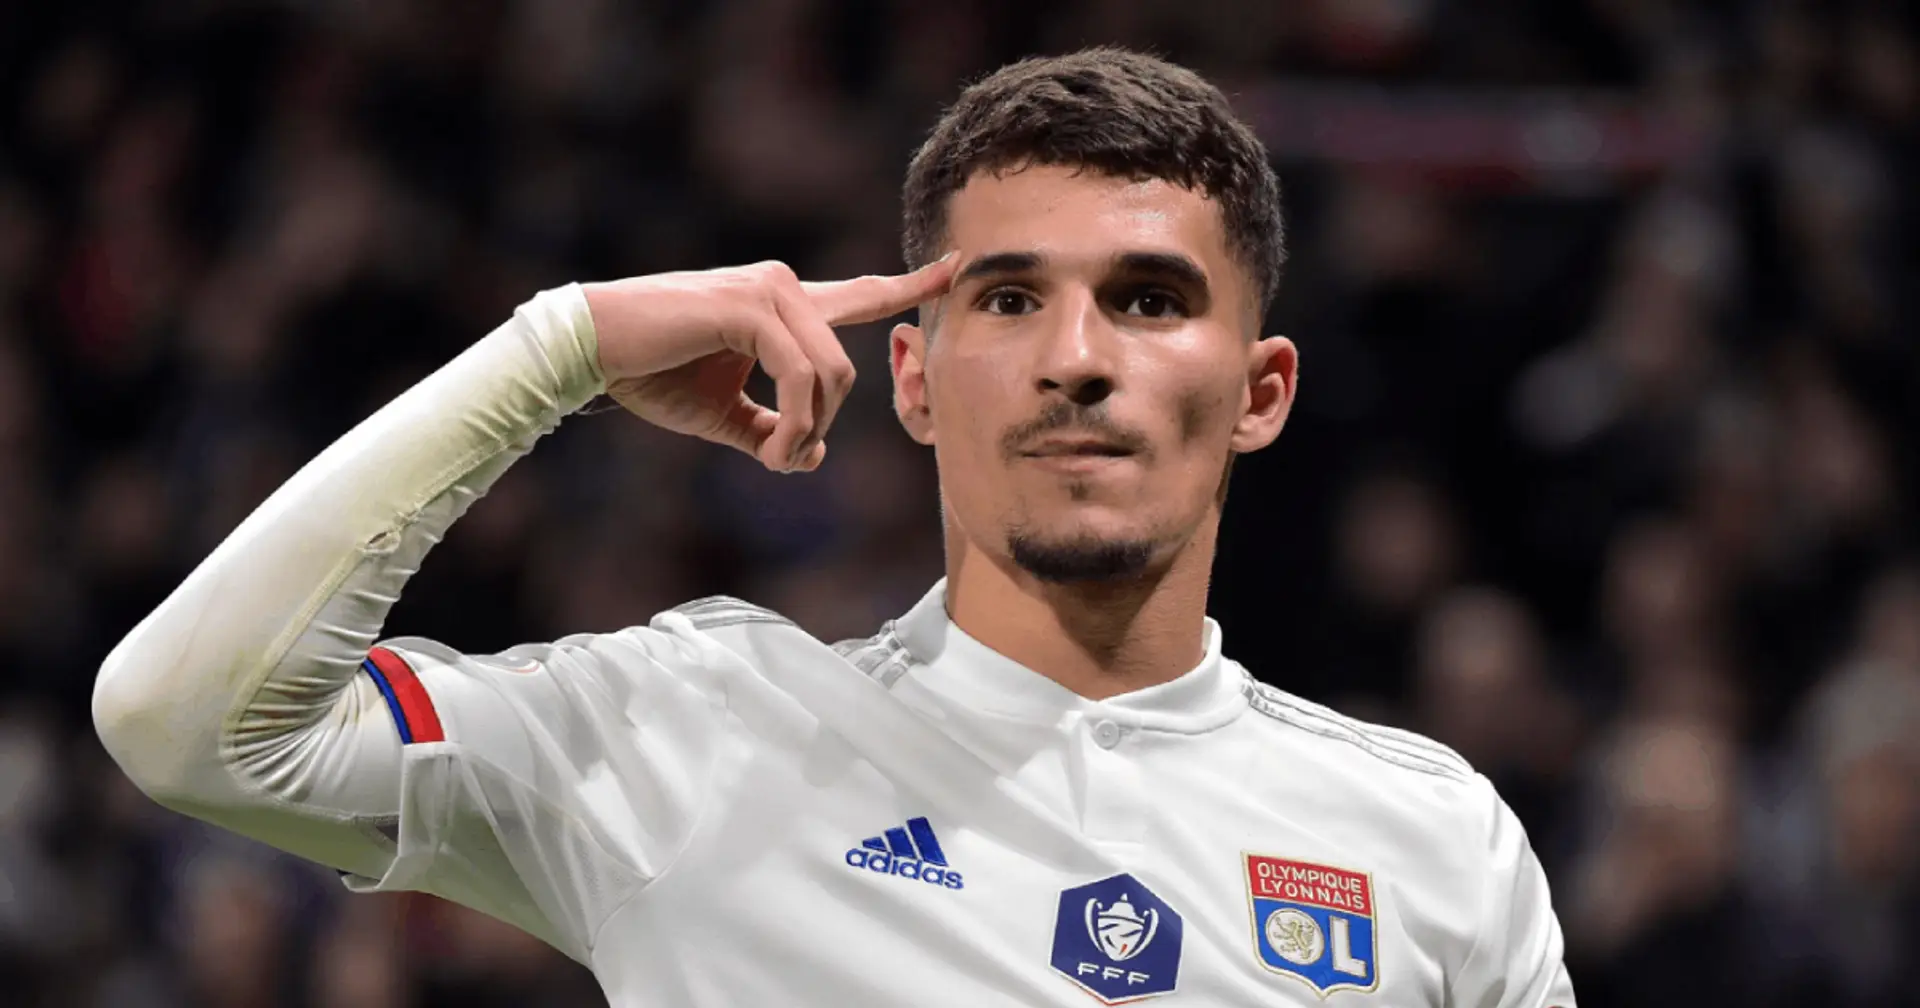 Arsenal have to sign Aouar whatever it may cost financially